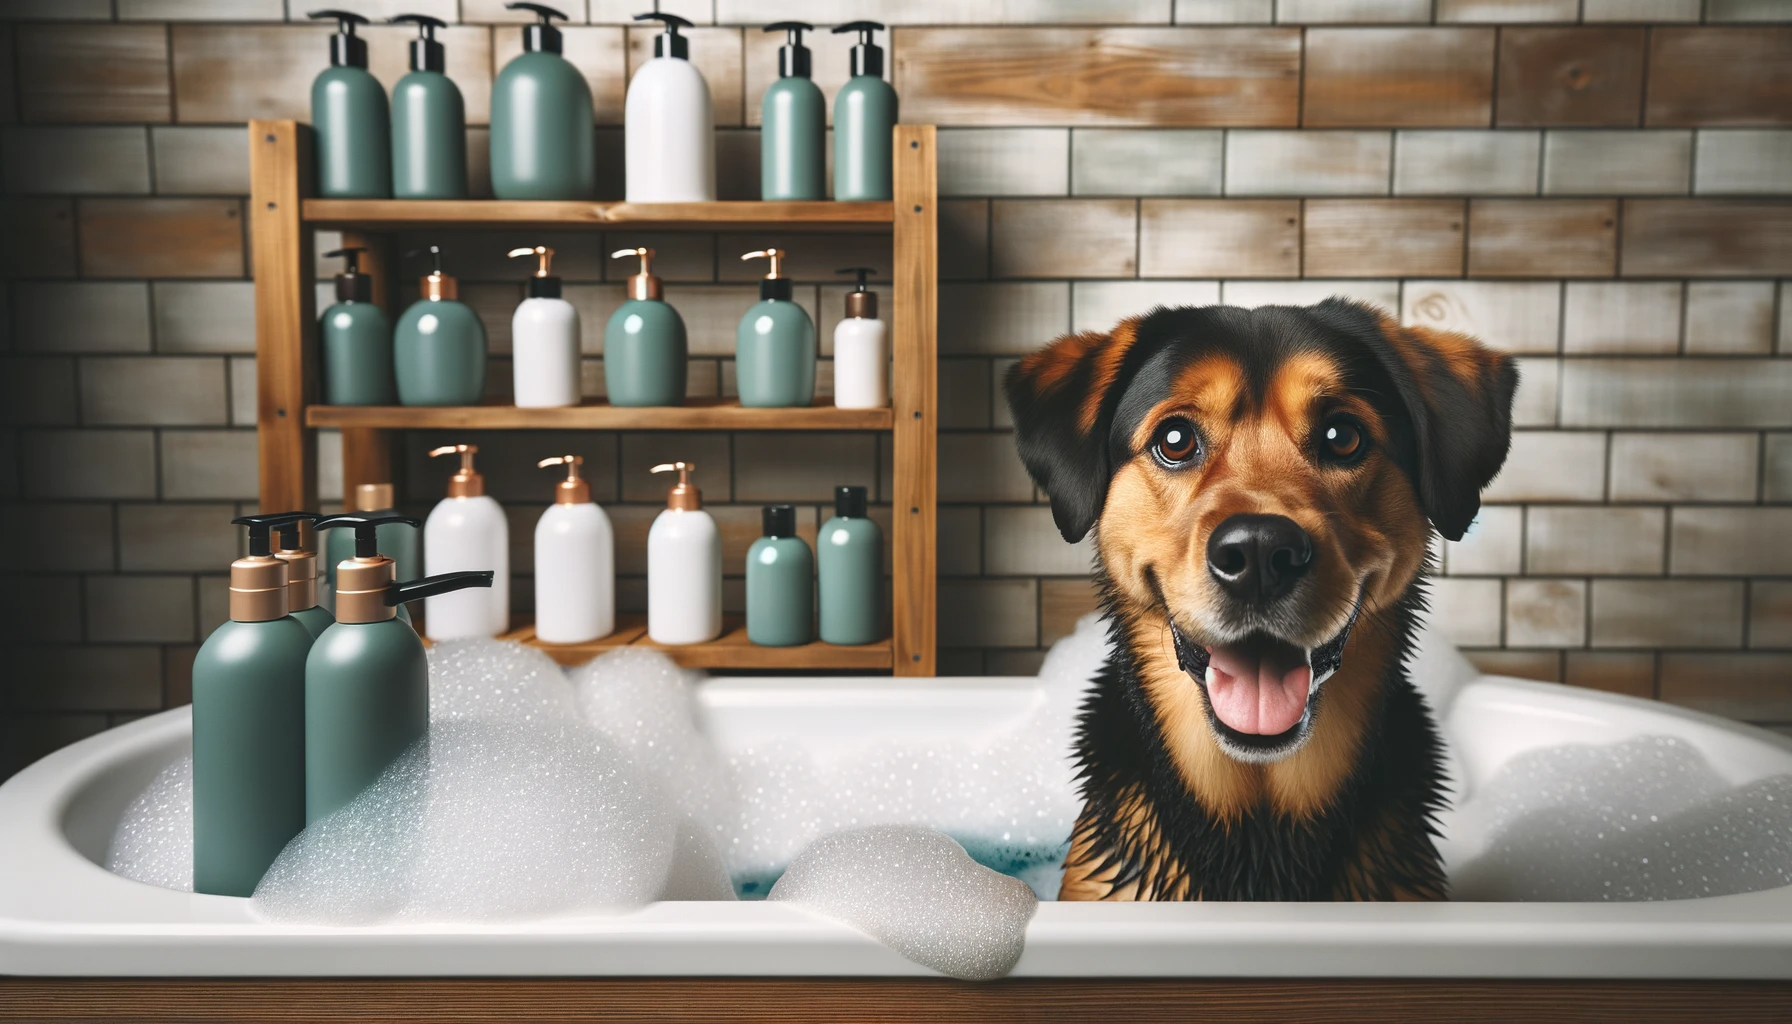 A Labrador mixed with Rottweiler enjoying a bubbly bath with coat conditioner and shampoo bottles visible